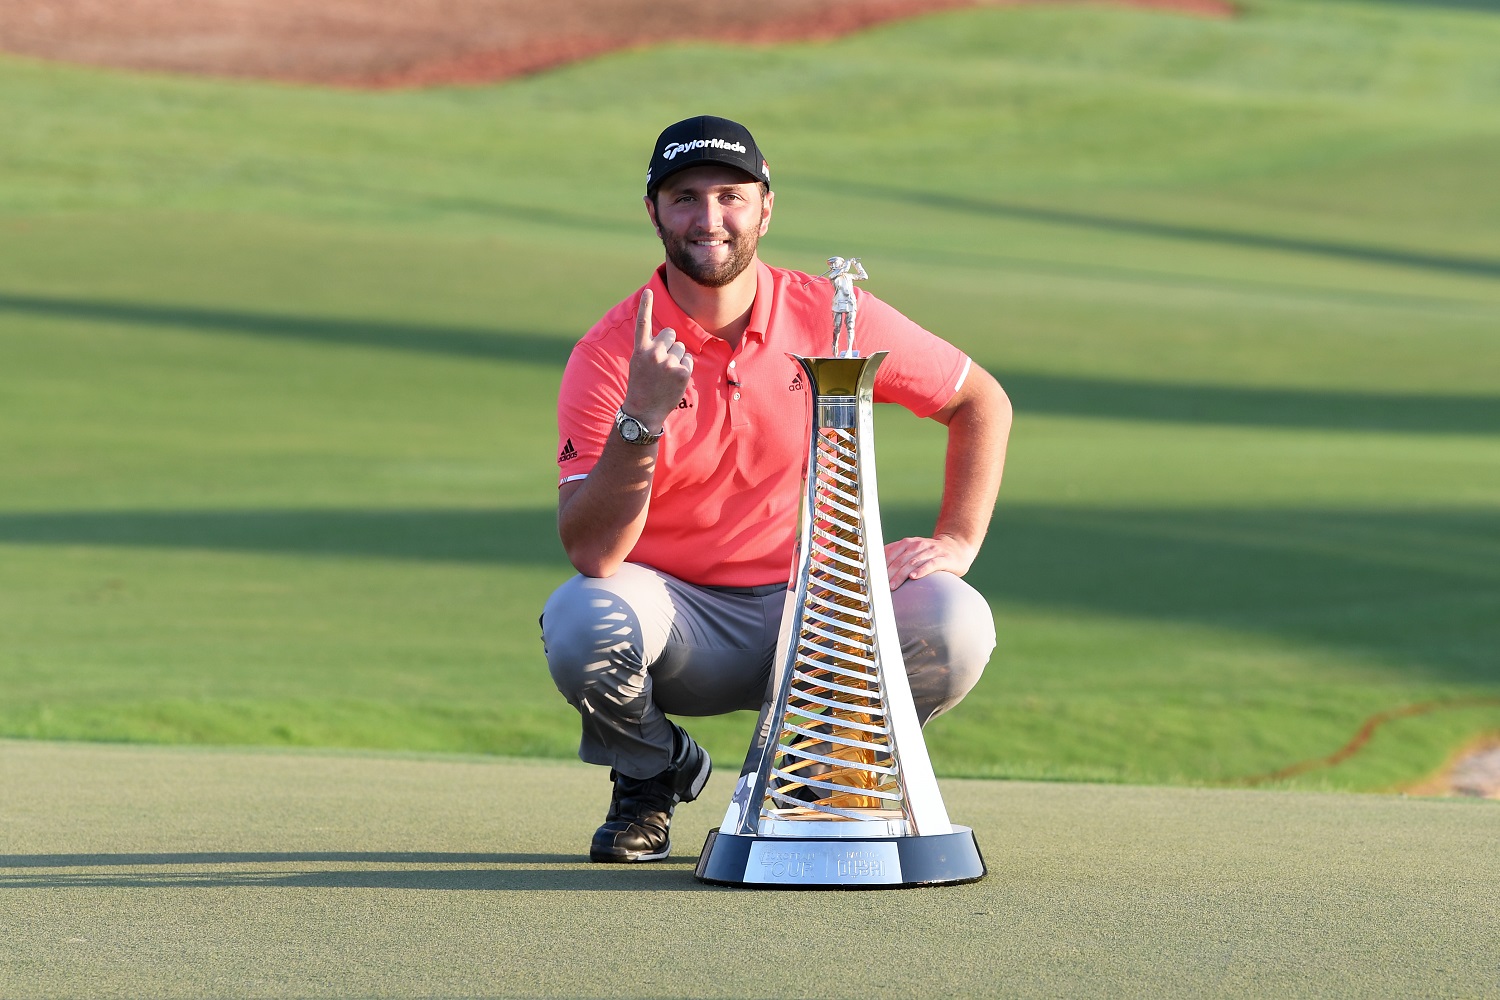 Jon Rahm of Spain poses with the Race to Dubai trophy following his victory in the DP World Tour Championship Dubai at Jumerirah Golf Estates on Nov. 24, 2019.